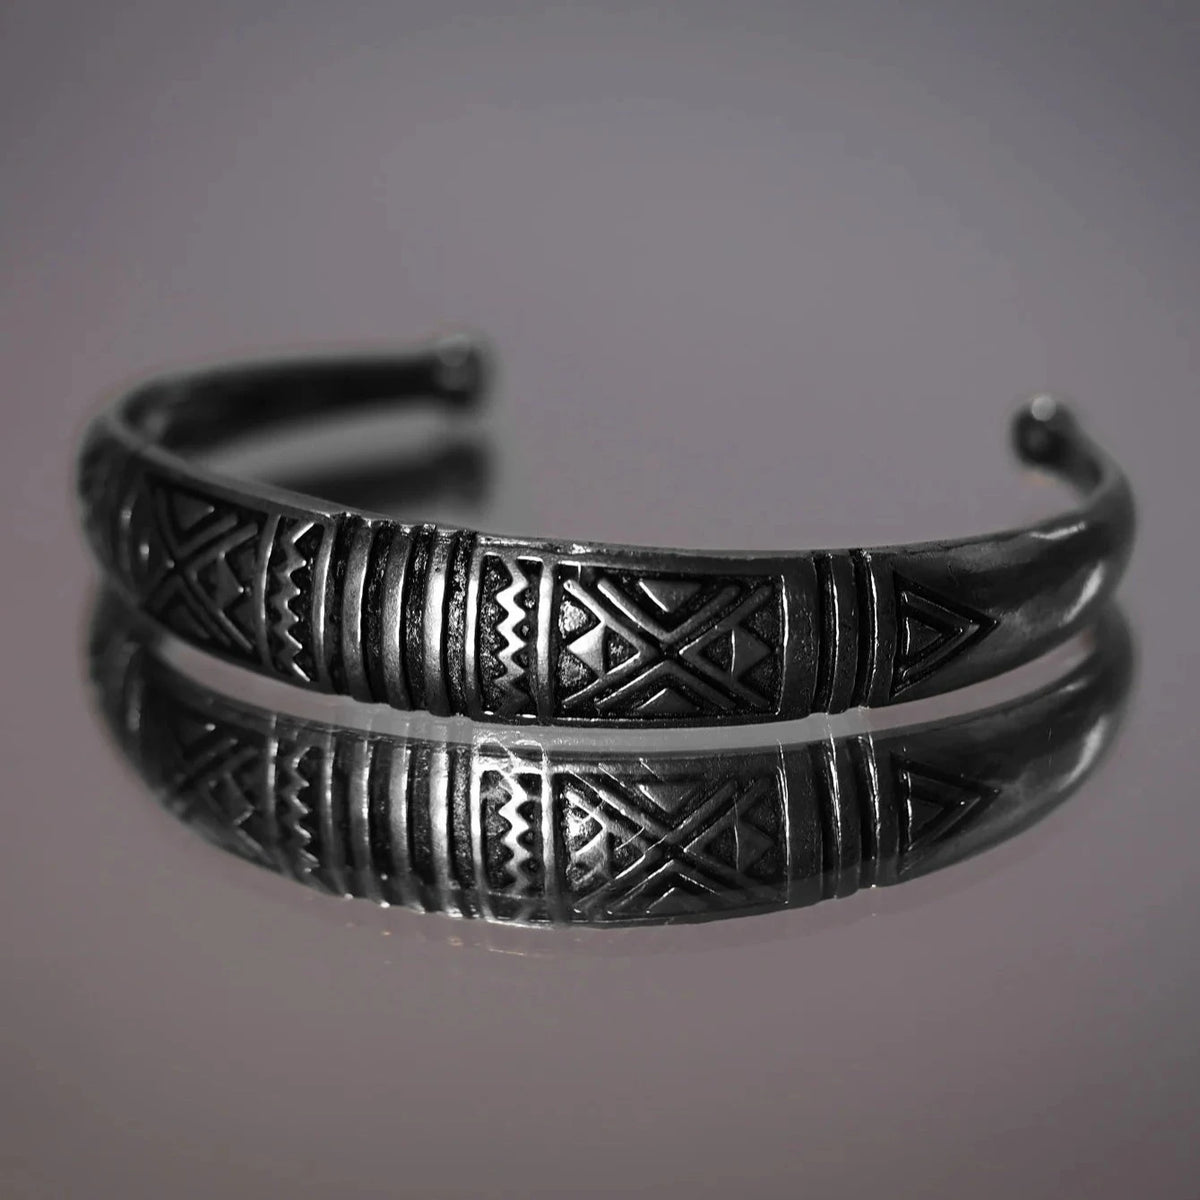 Curved bracelet with decoration